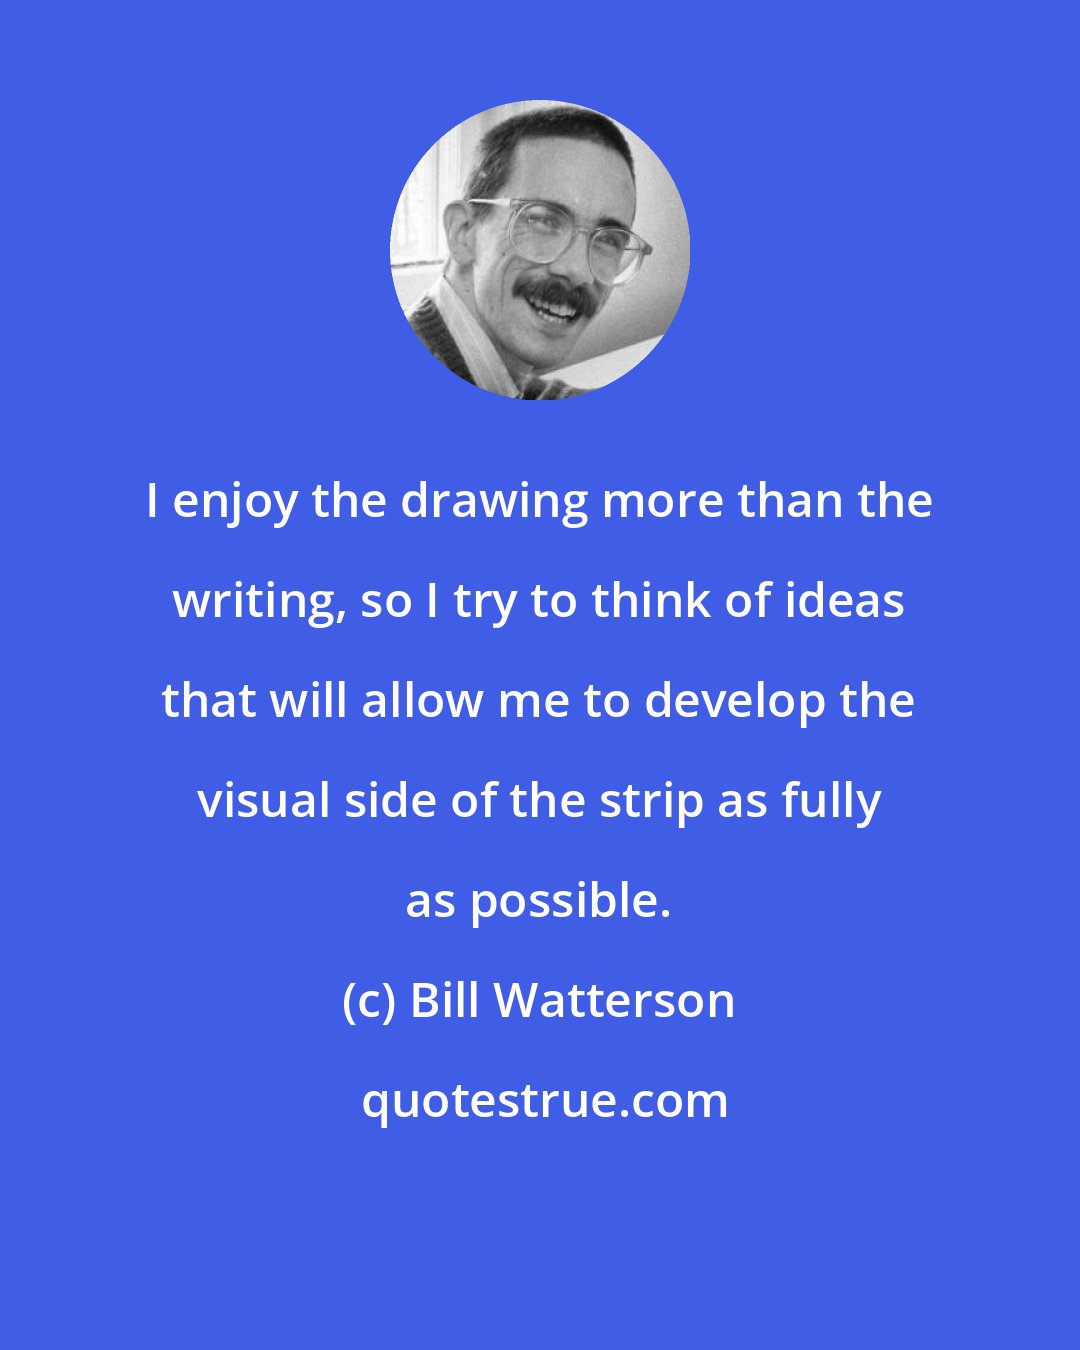 Bill Watterson: I enjoy the drawing more than the writing, so I try to think of ideas that will allow me to develop the visual side of the strip as fully as possible.